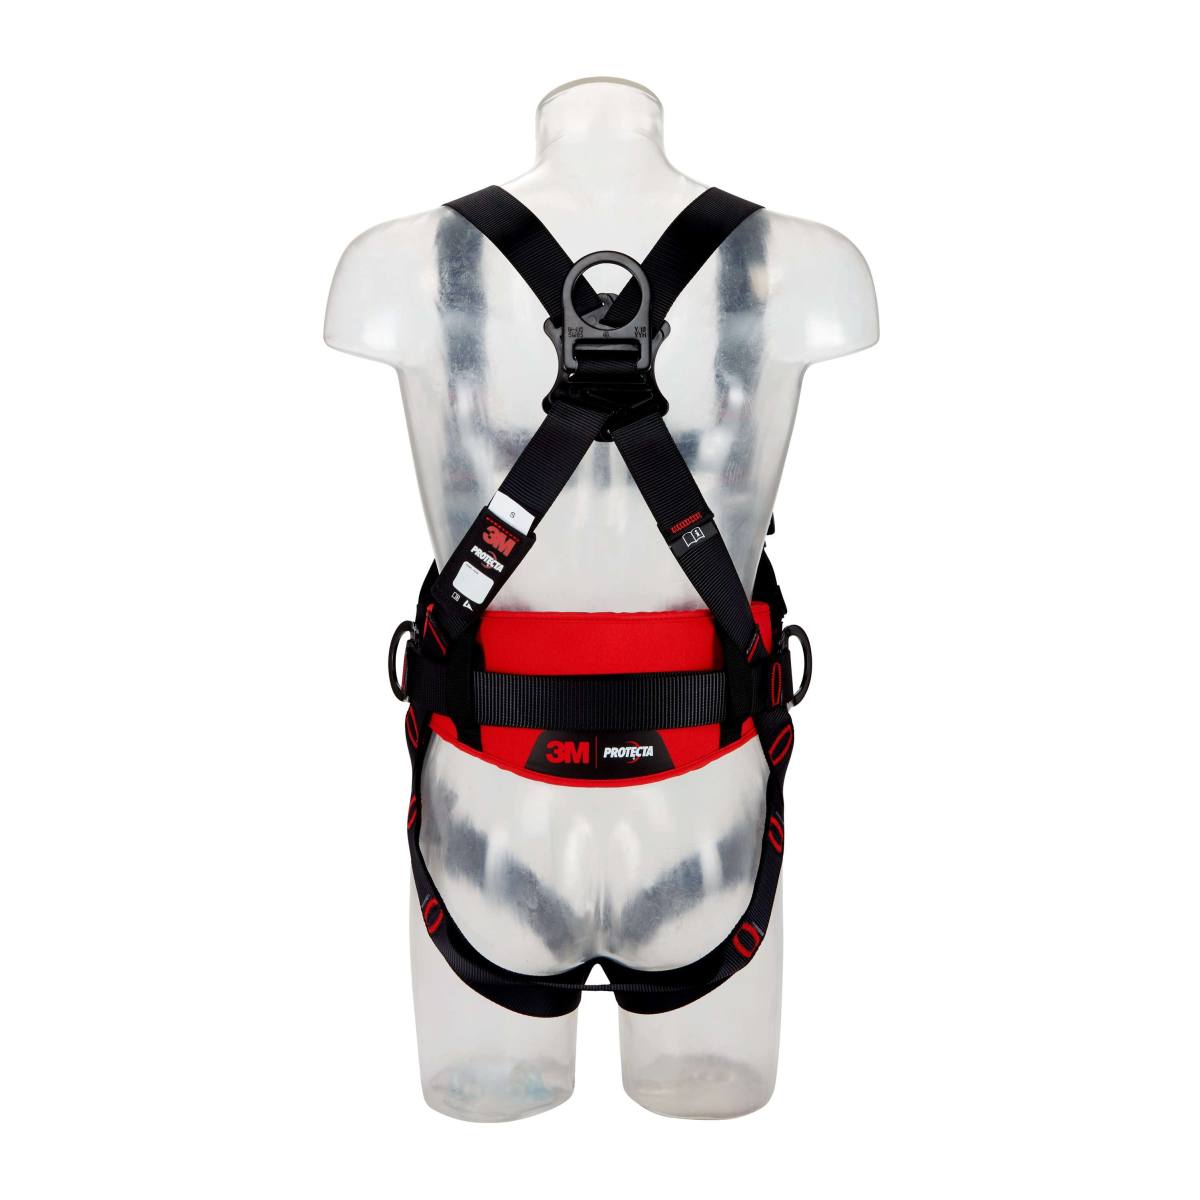 3M PROTECTA full body harness - chest and rear fall arrest eyelets, comfort harness with side attachment points, automatic buckles, chest and rear fall indicators, belt end depot, label protection with labeling field, black coated, XL